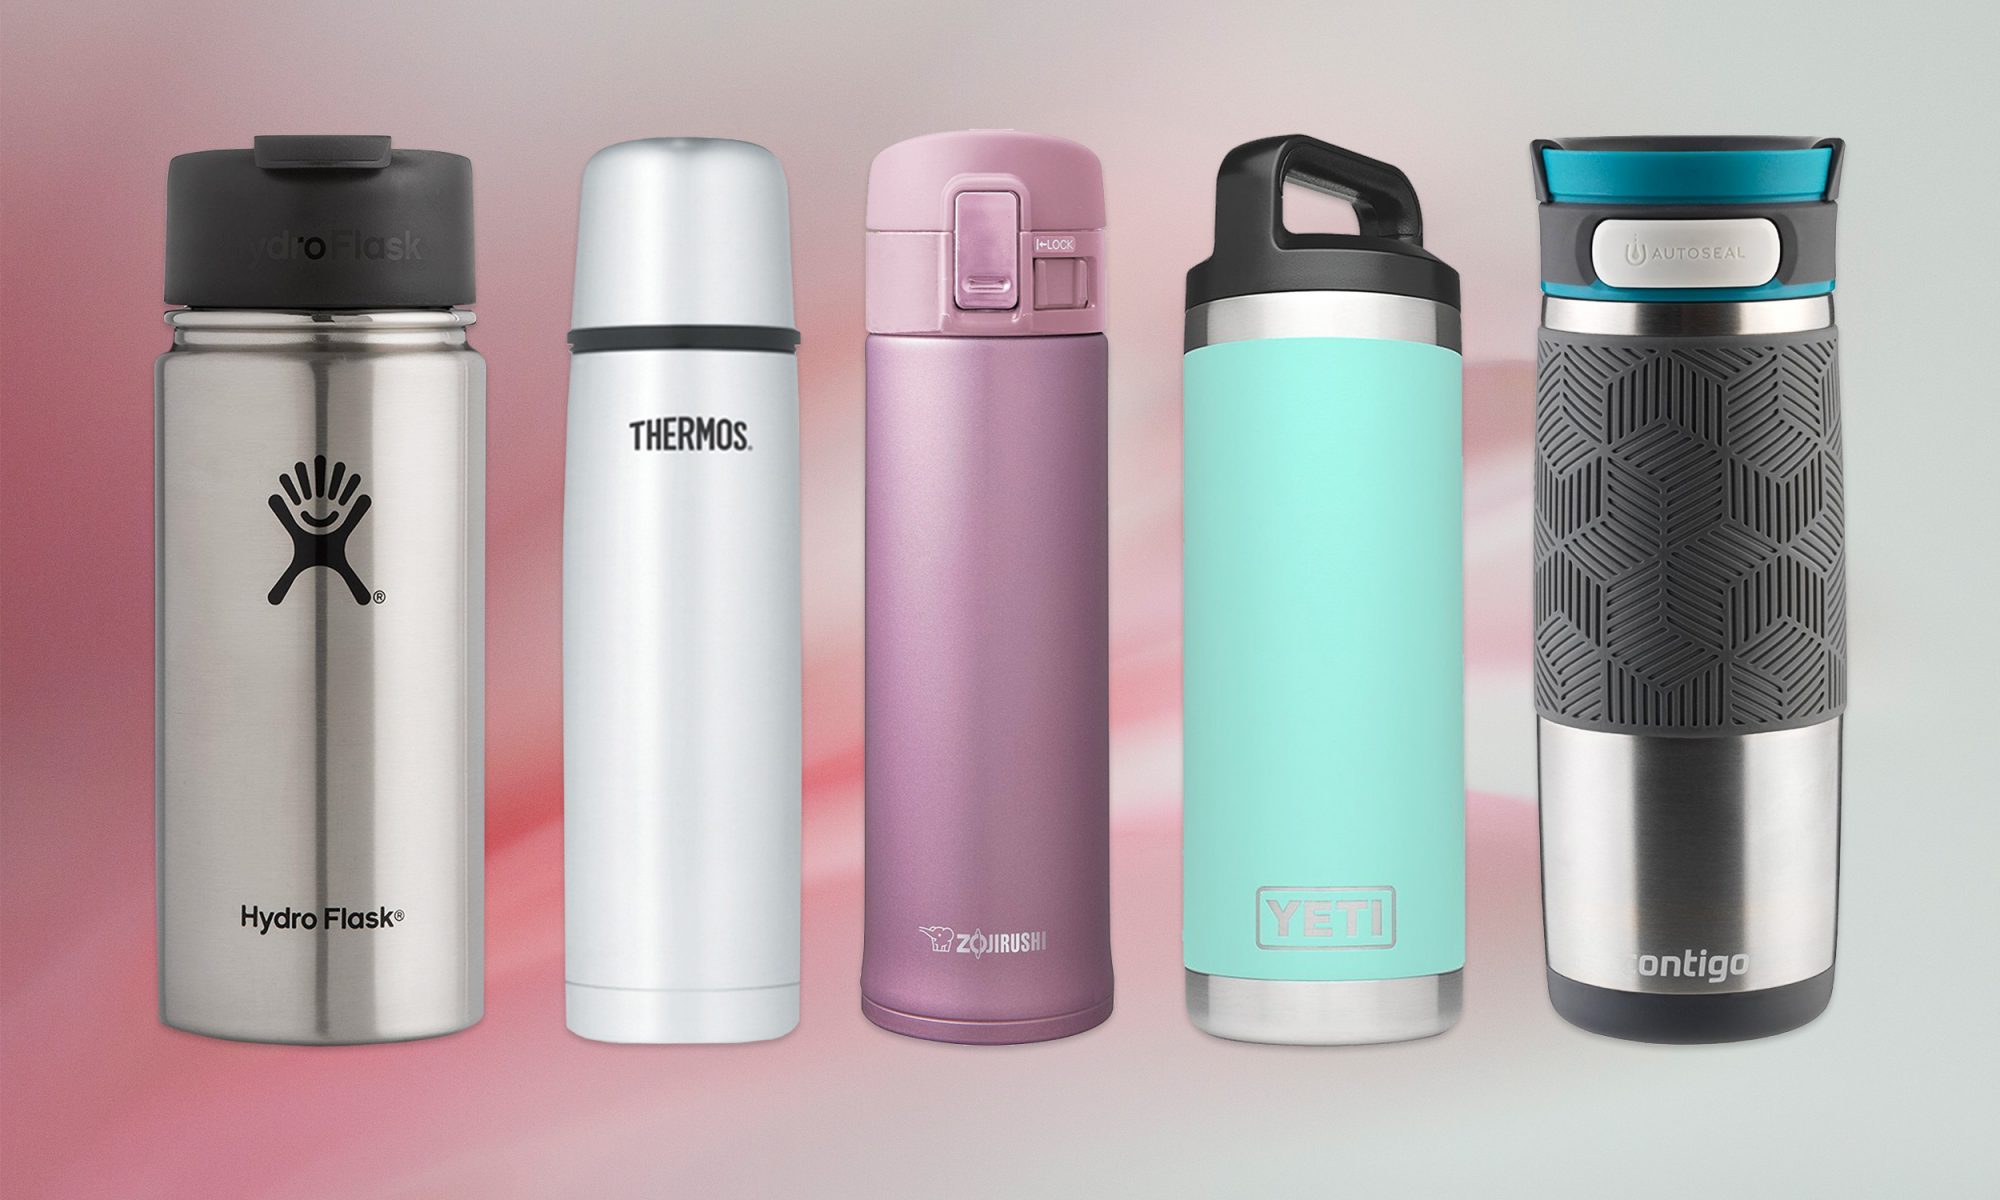 Details about   Stainless Steel Travel Mug Insulated Camping Outdoor Drink Thermal Flask Beaker 